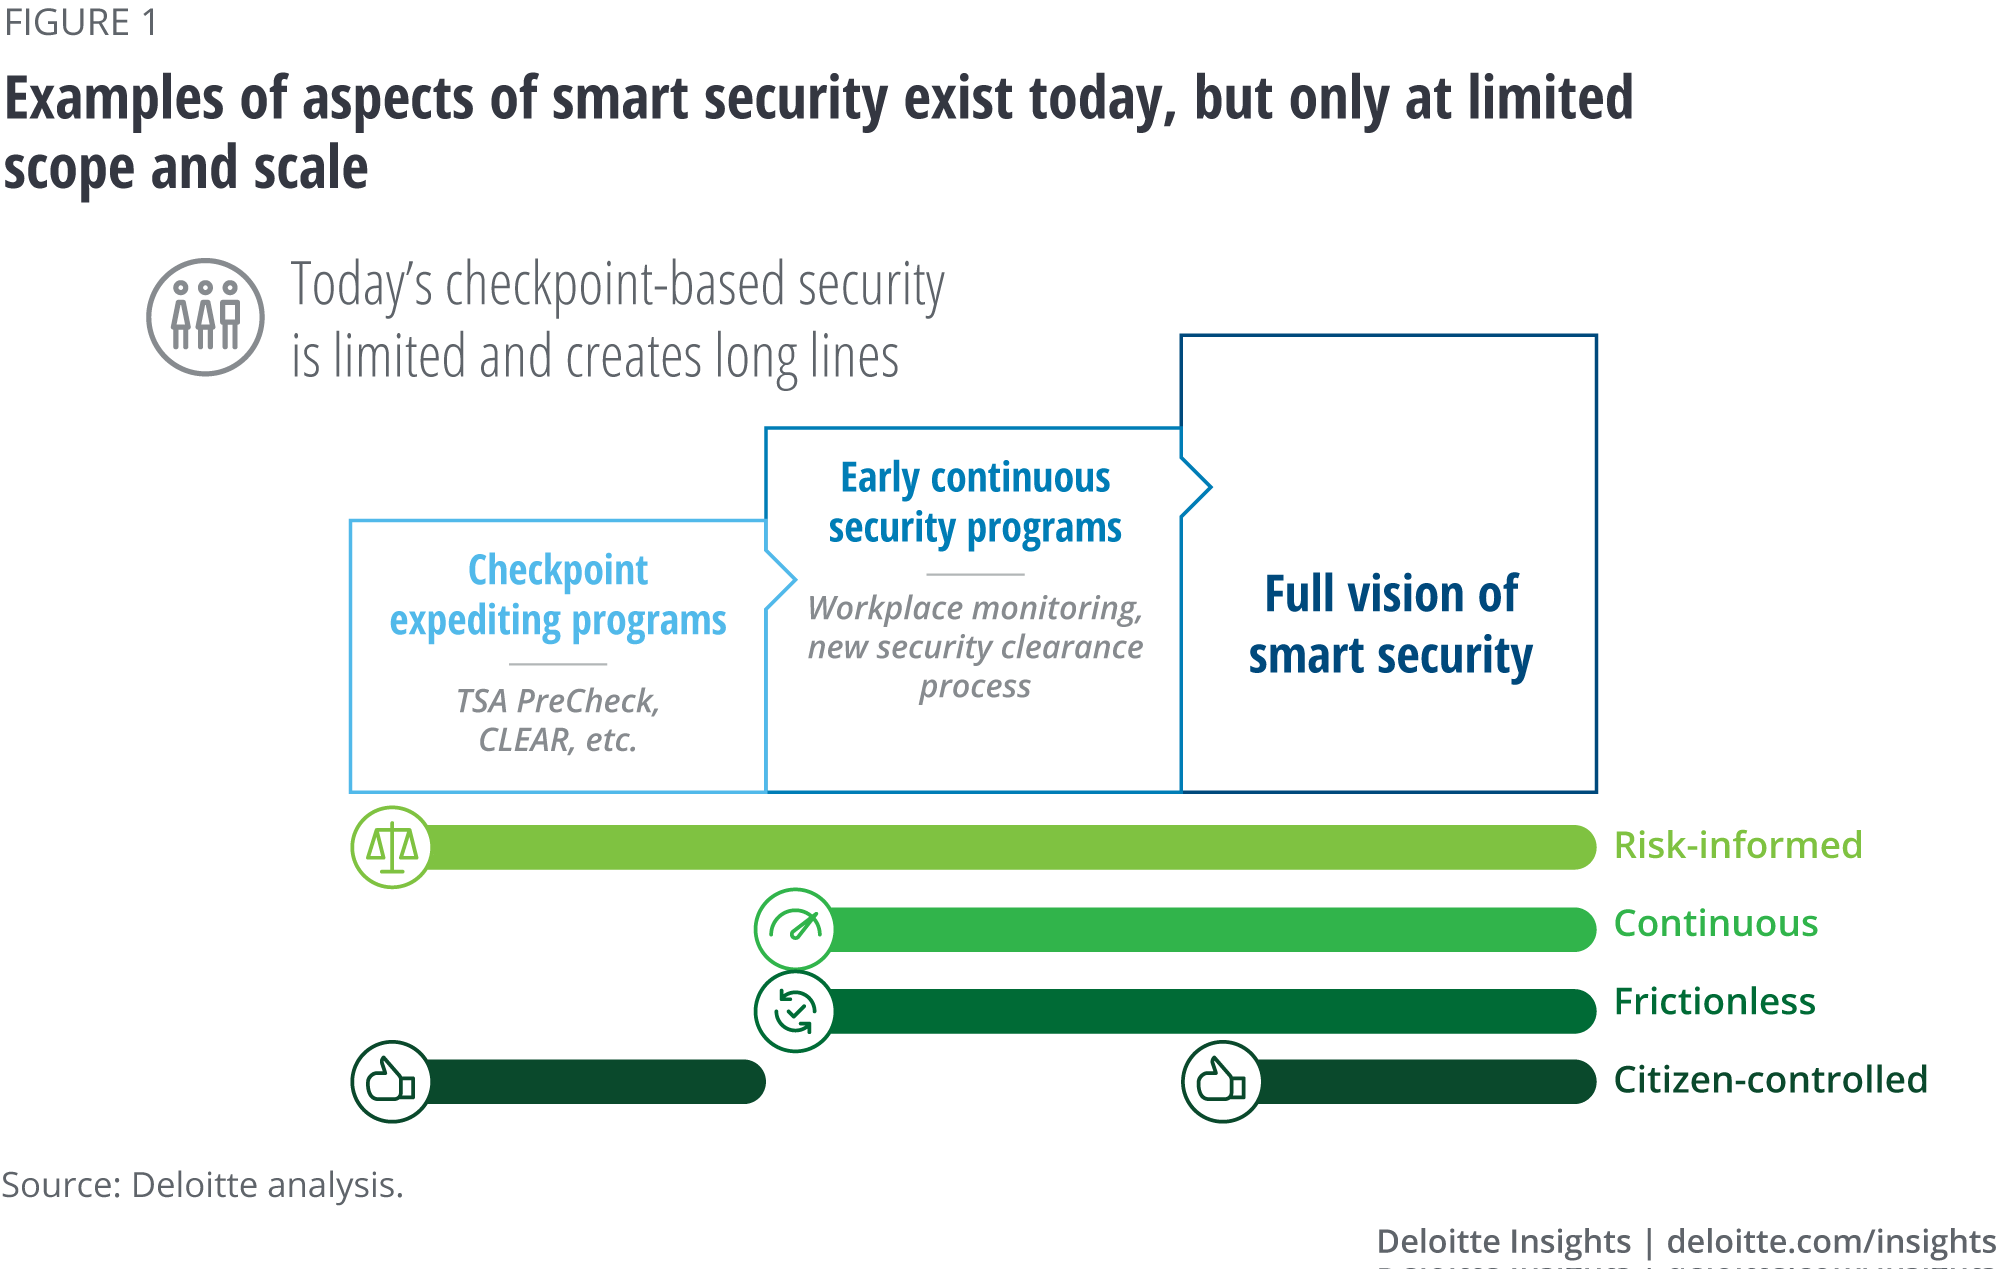 Examples of aspects of smart security exist today, but only at limited scope and scale